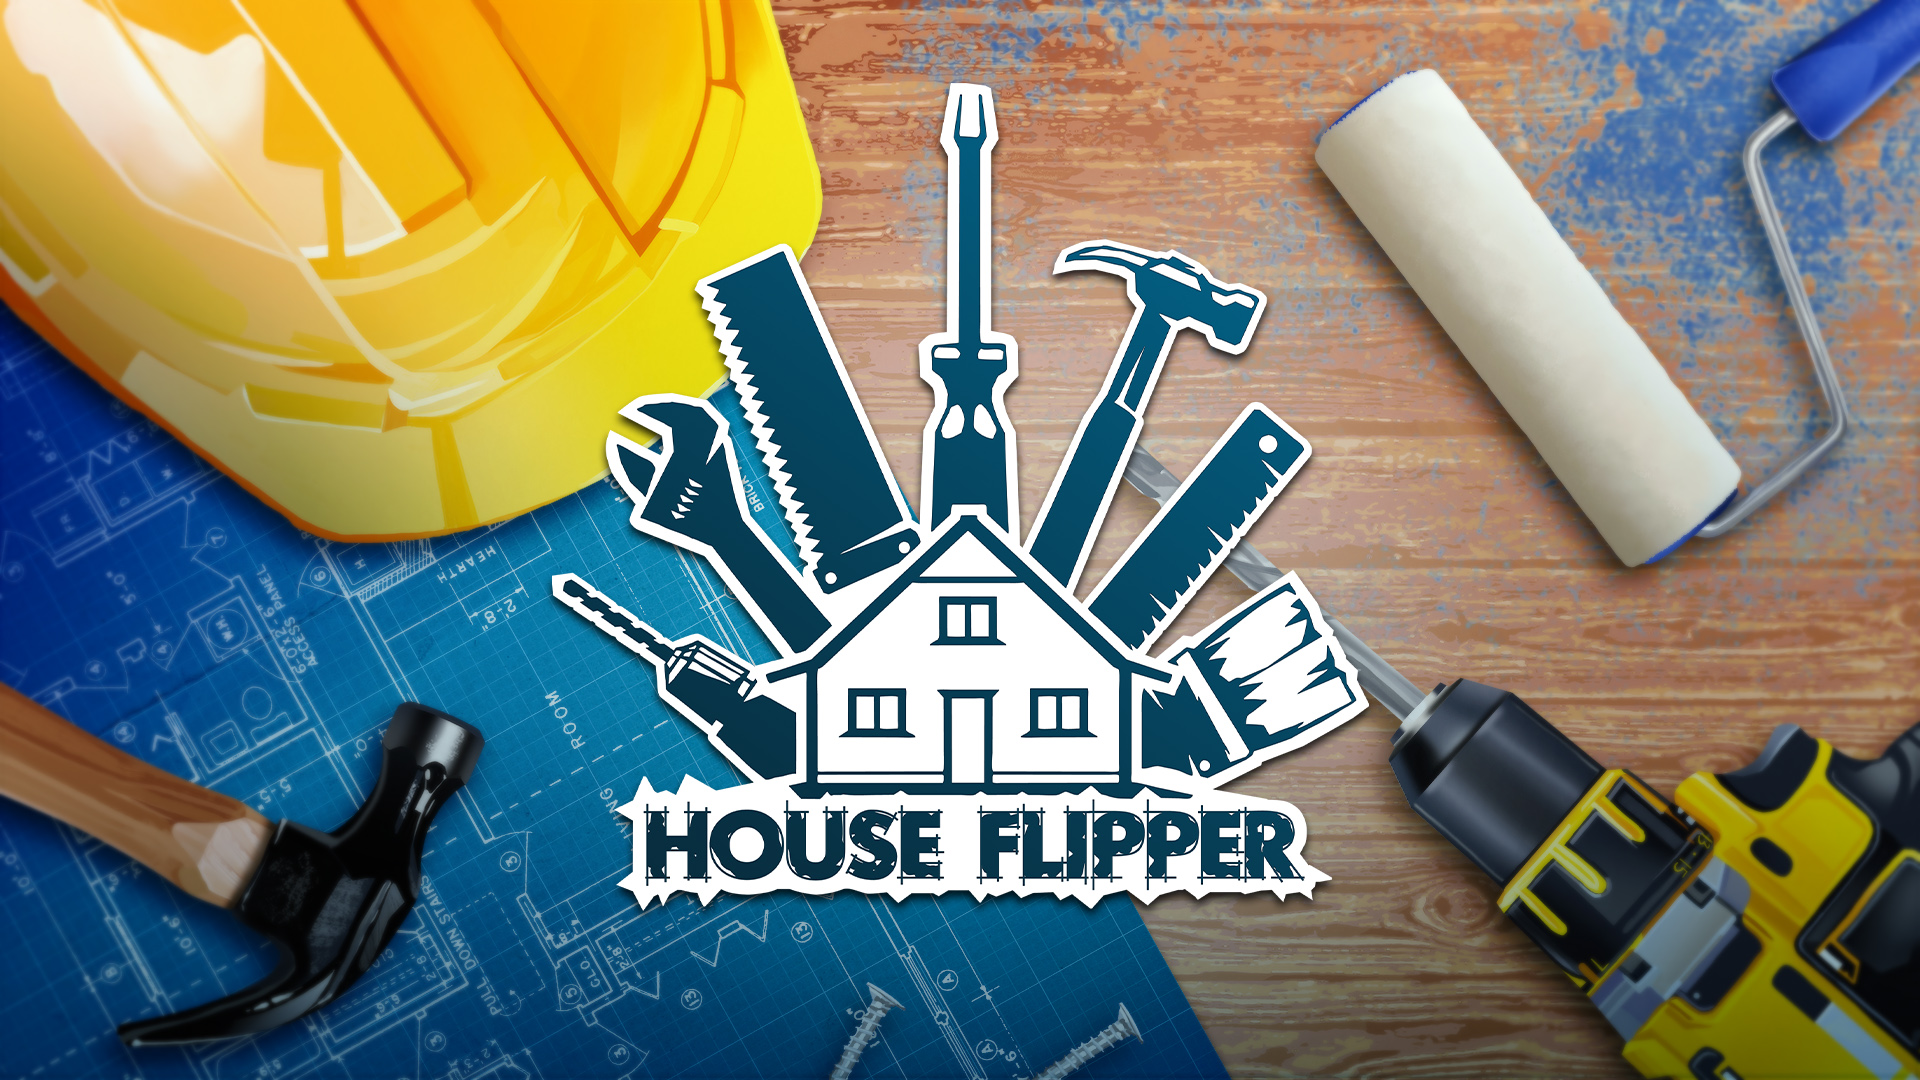 Video For House Flipper – Renovating Old Fixer-Uppers is Available Now with Xbox Game Pass!